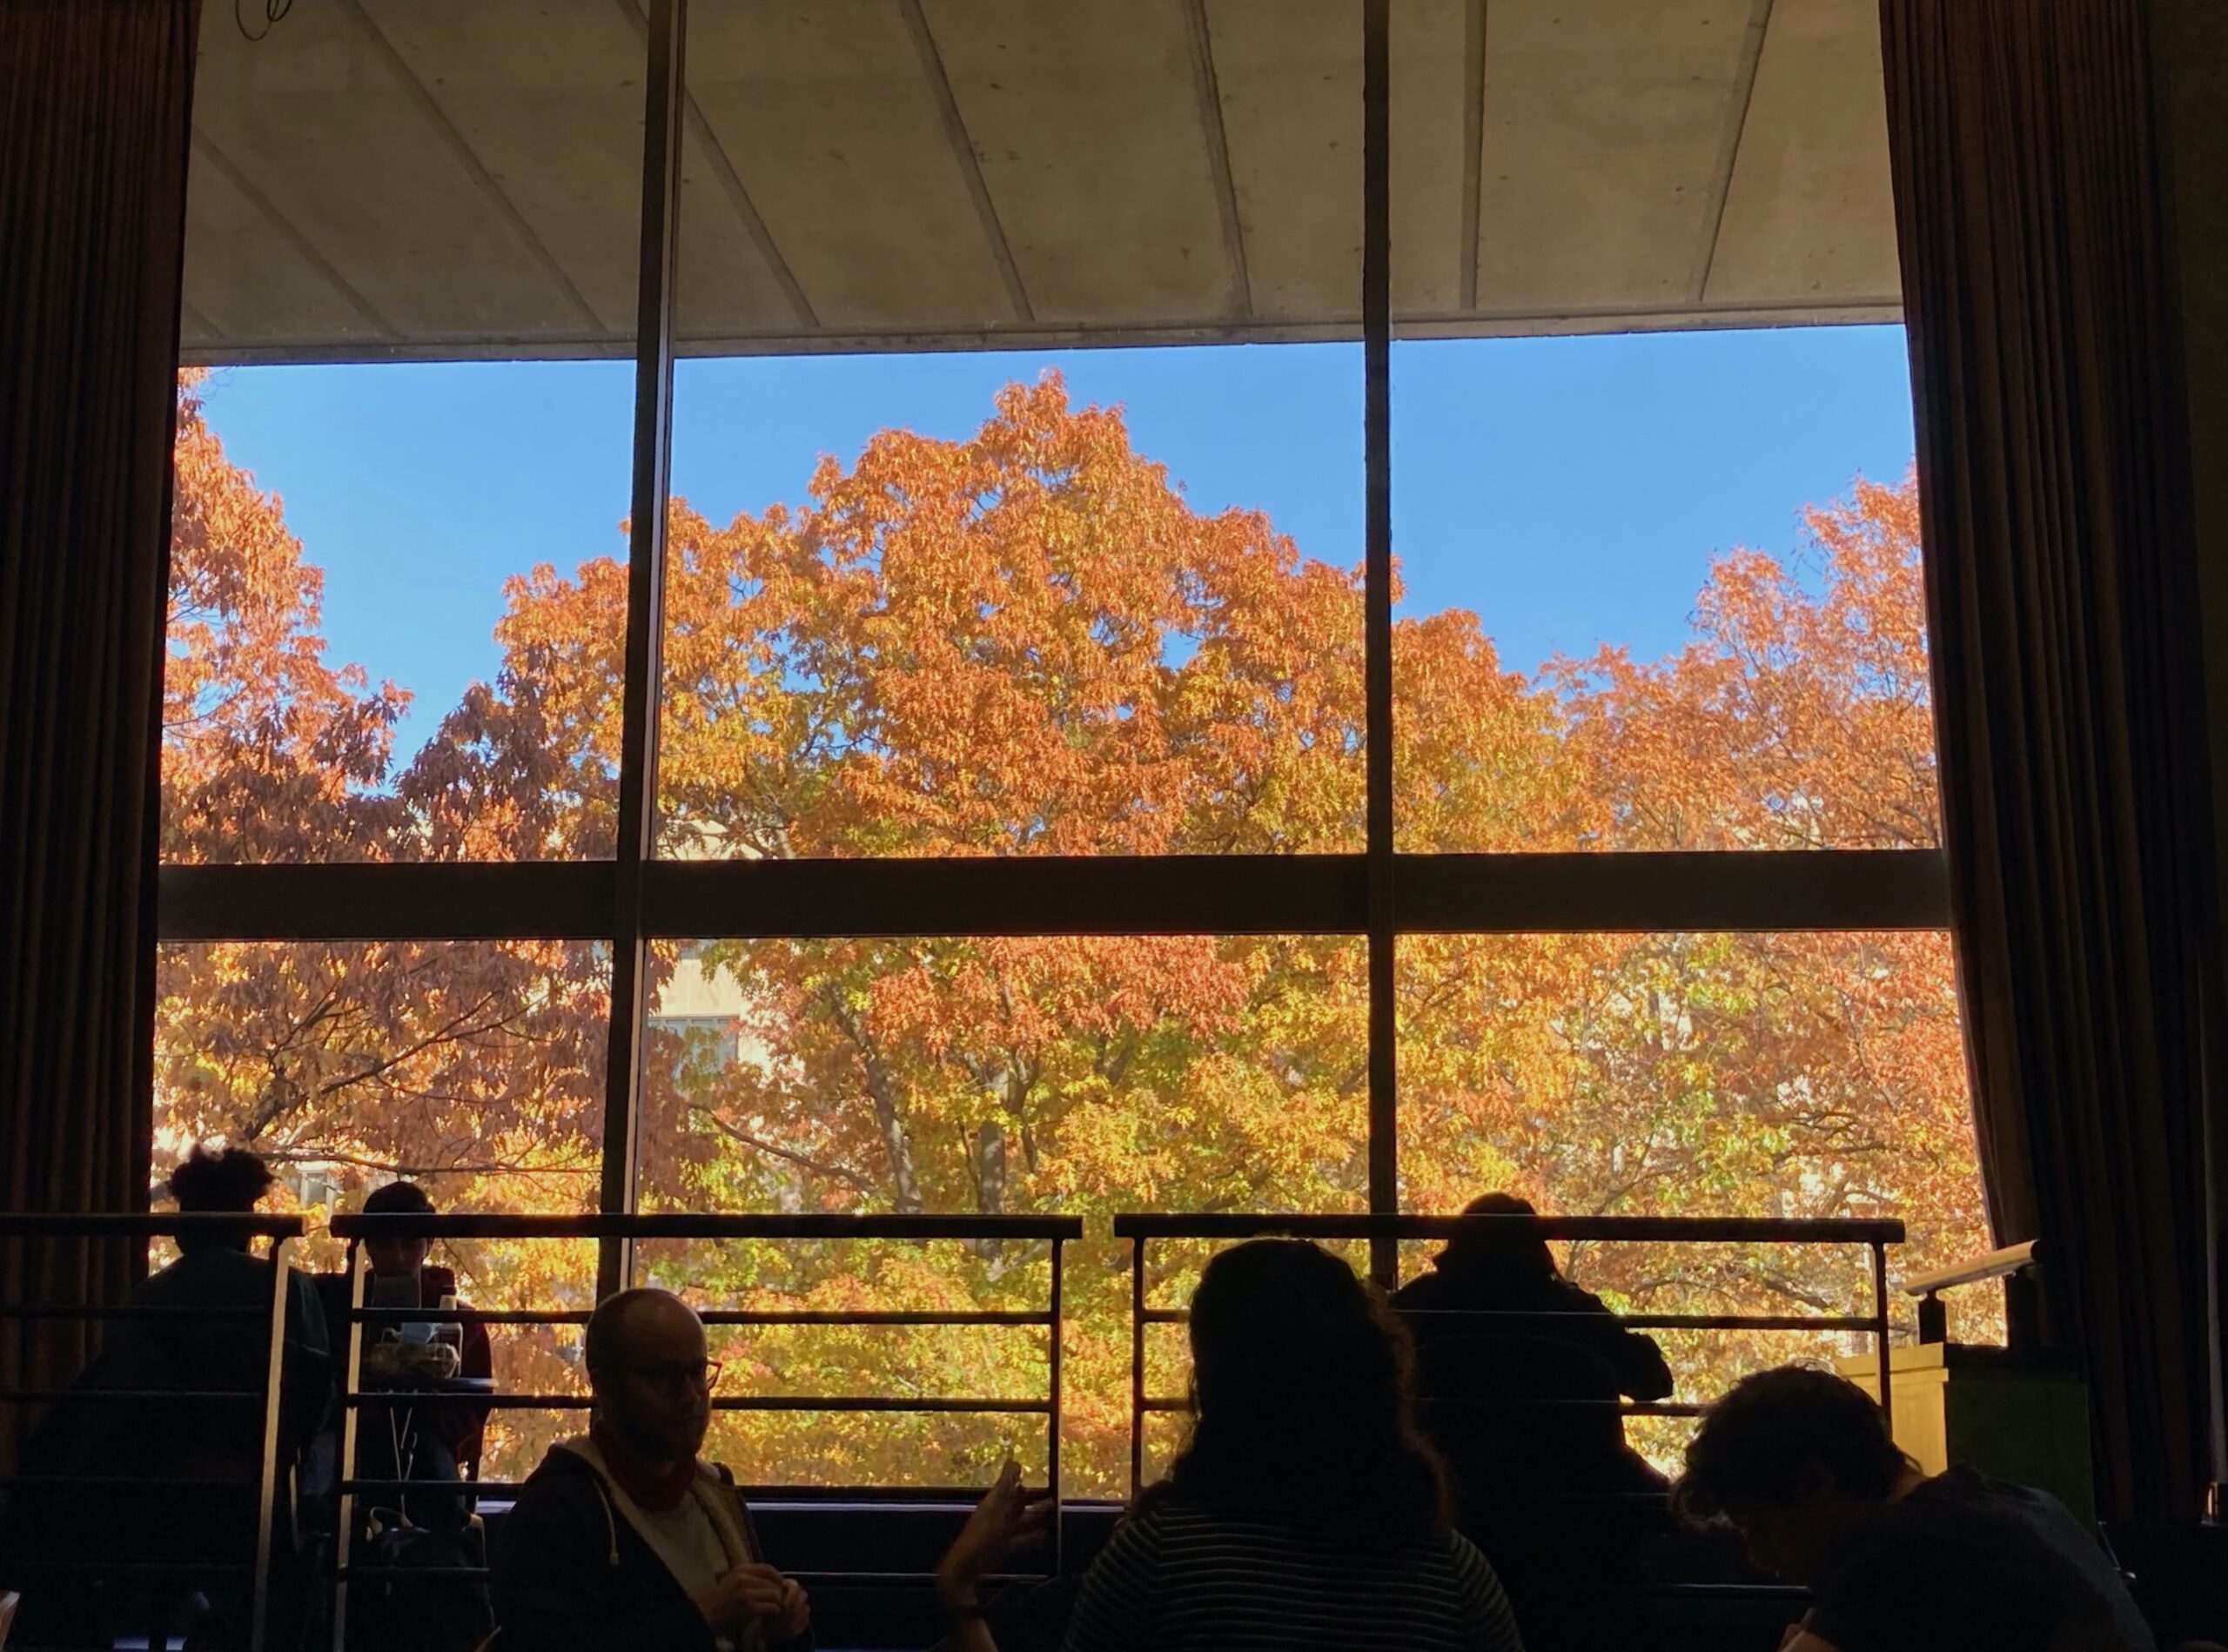 The foreground is a dark room with people's silhouettes. The background, seen through a large window, is orangey-red trees.